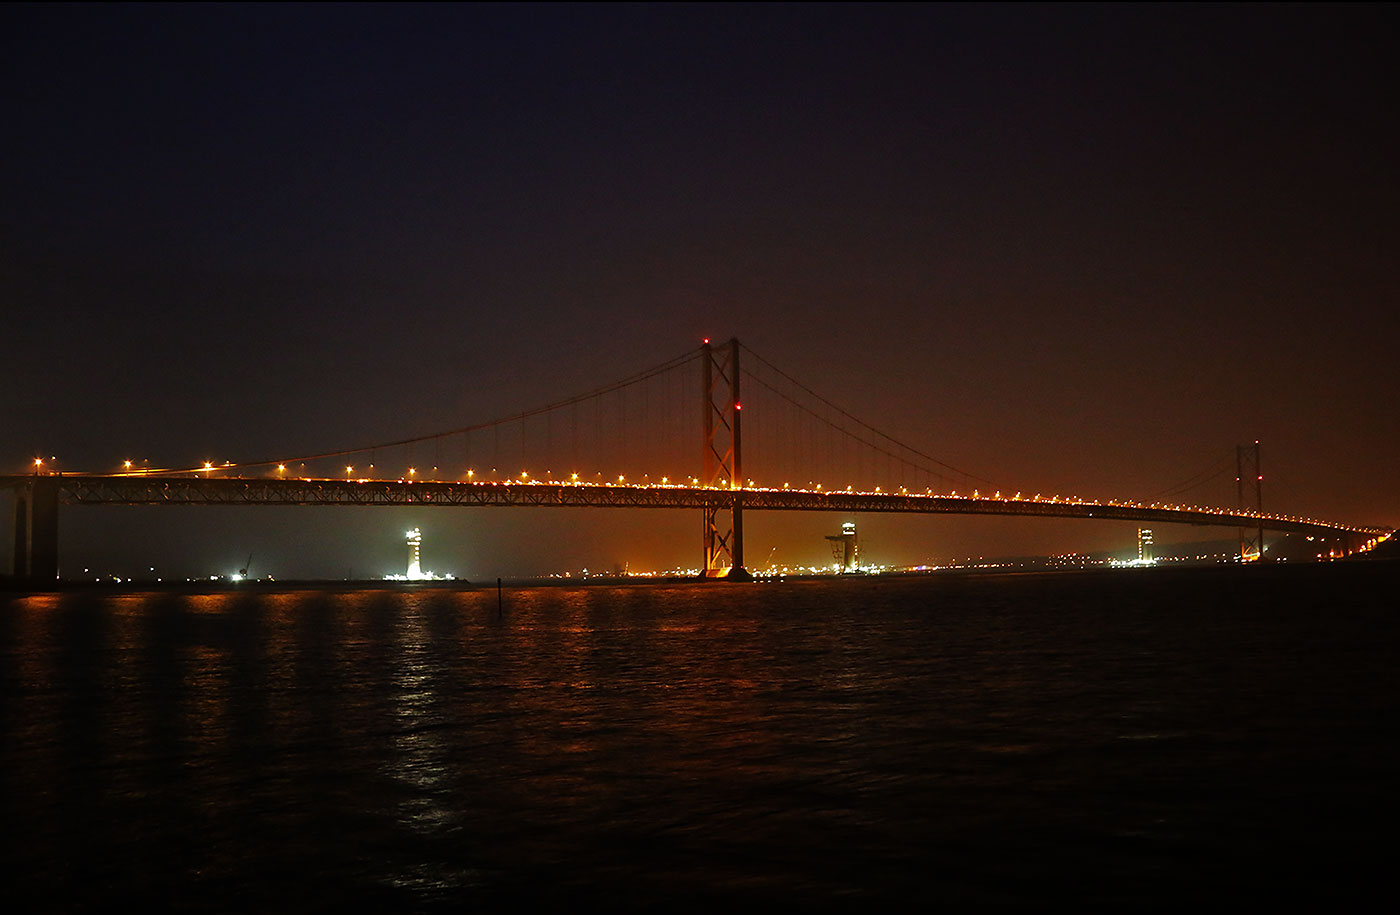 Forth Road Bridge 50th Anniversary Celebrations, September 2014  - The Torchlight Procession across the Forth Road Bridge